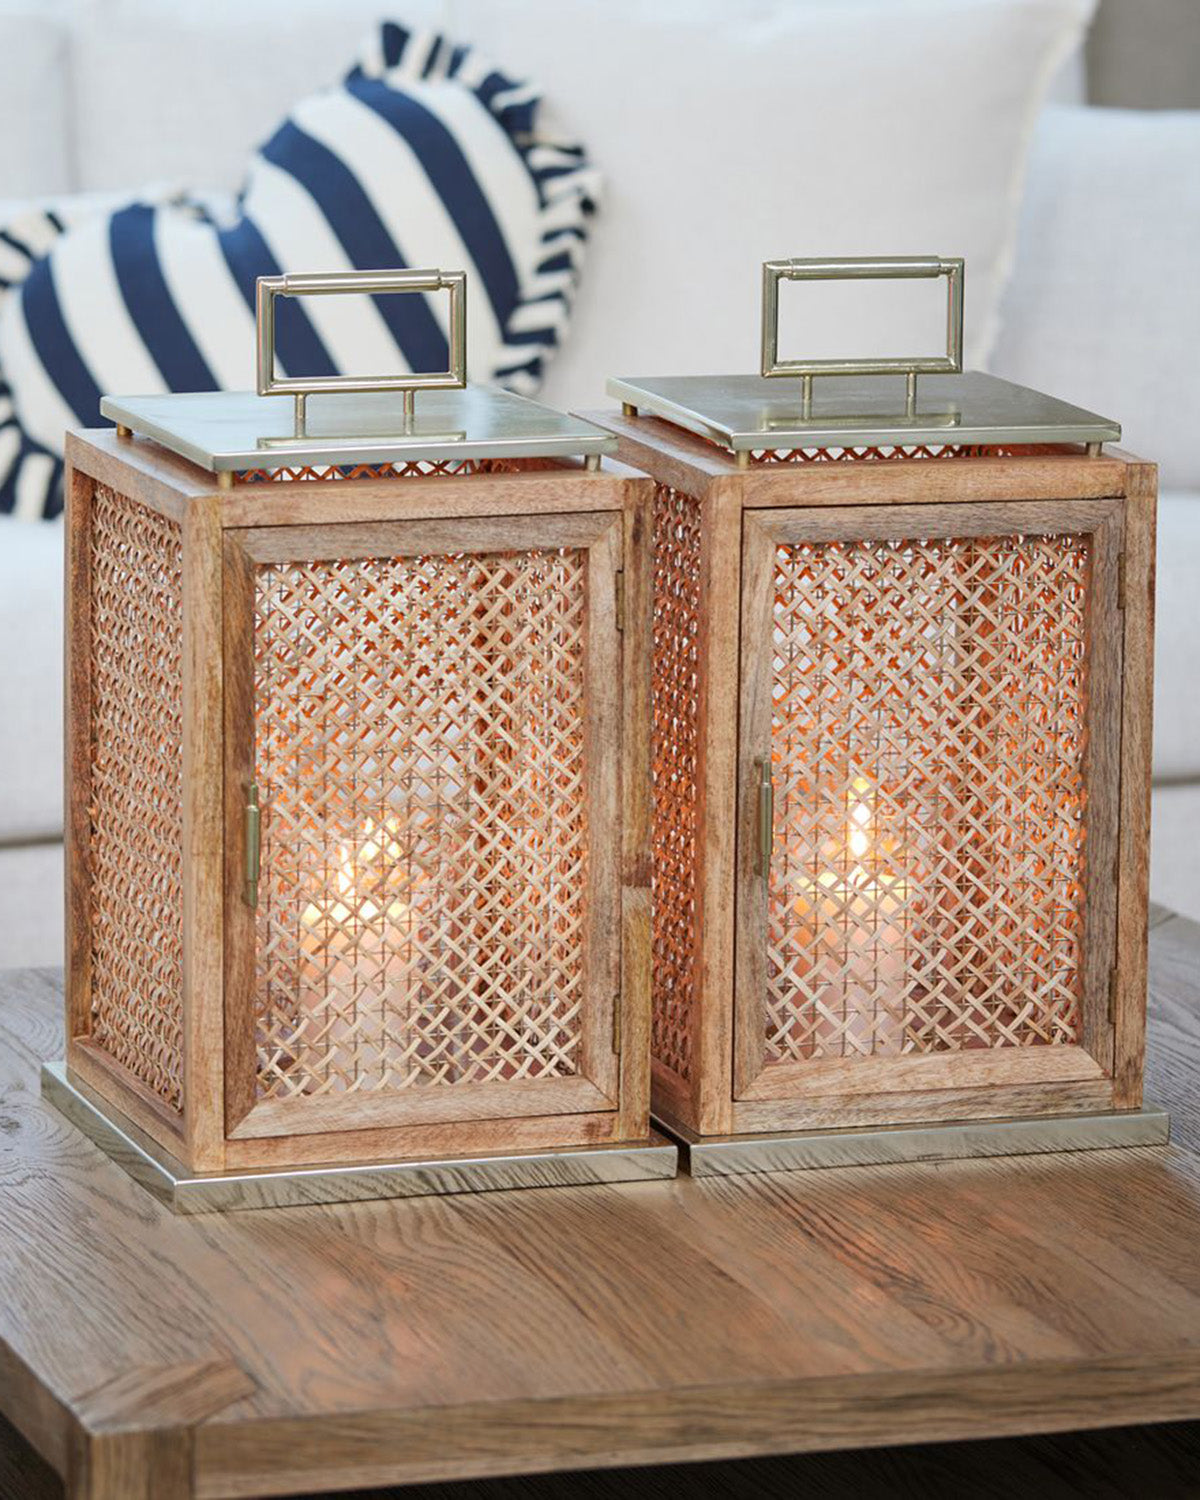 LANTERN made of Rattan and wood, bottom edges are made of soft gold aluminum  by Riviera Maison